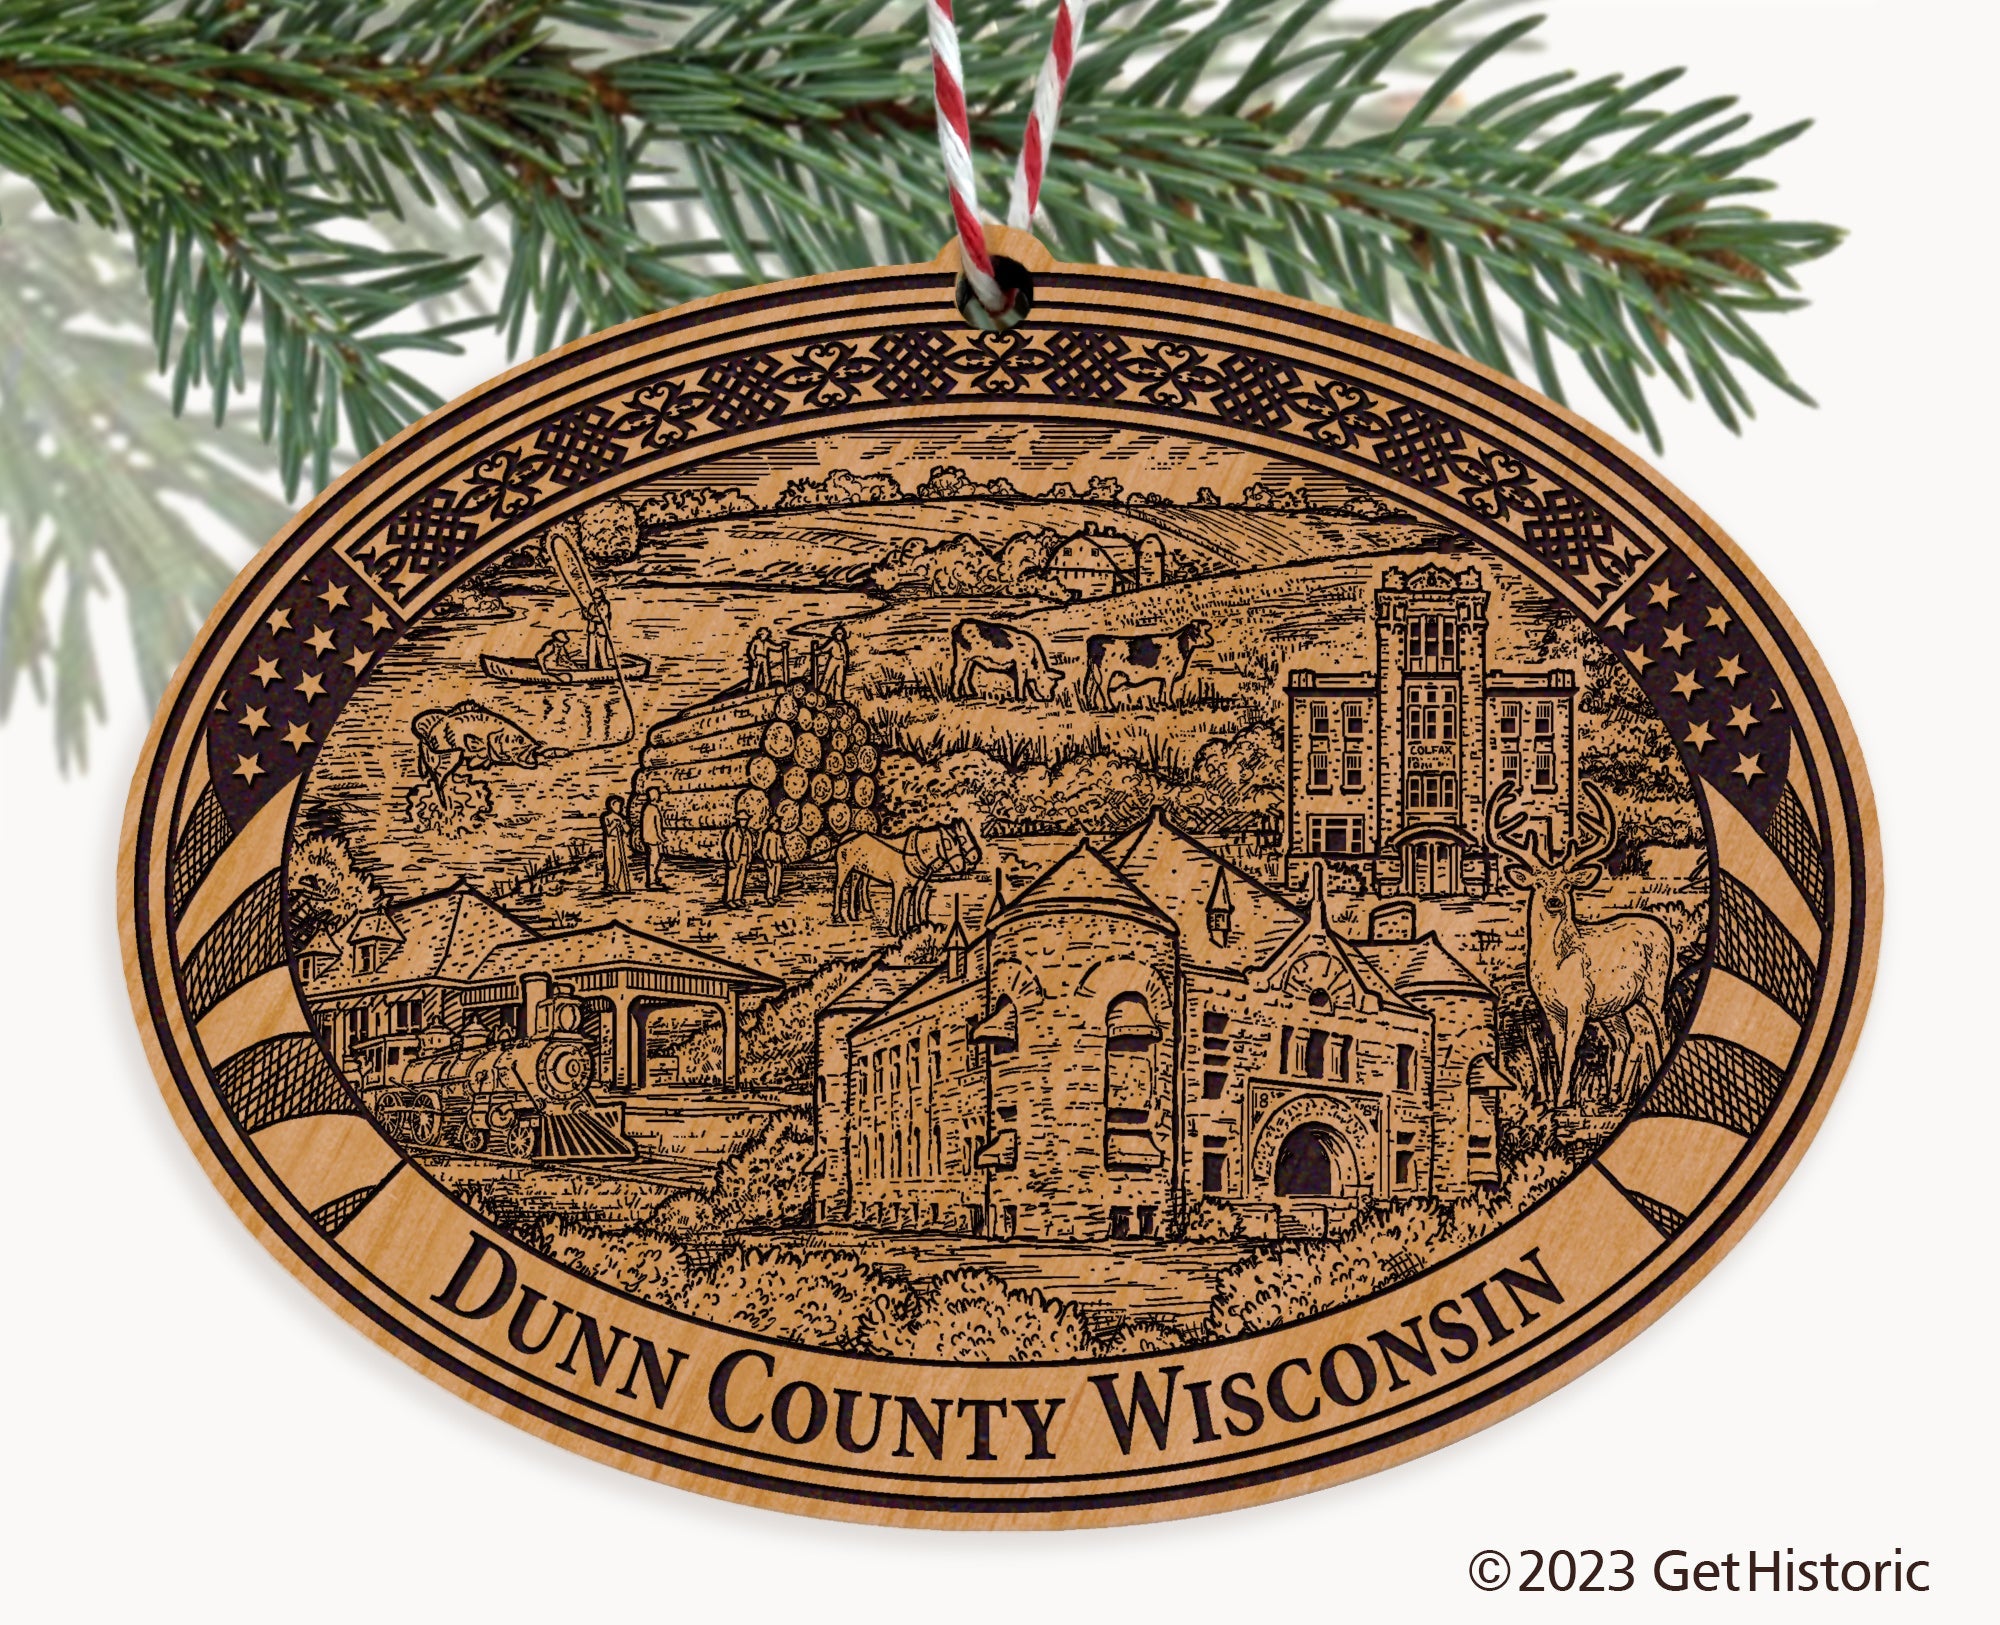 Dunn County Wisconsin Engraved Natural Ornament